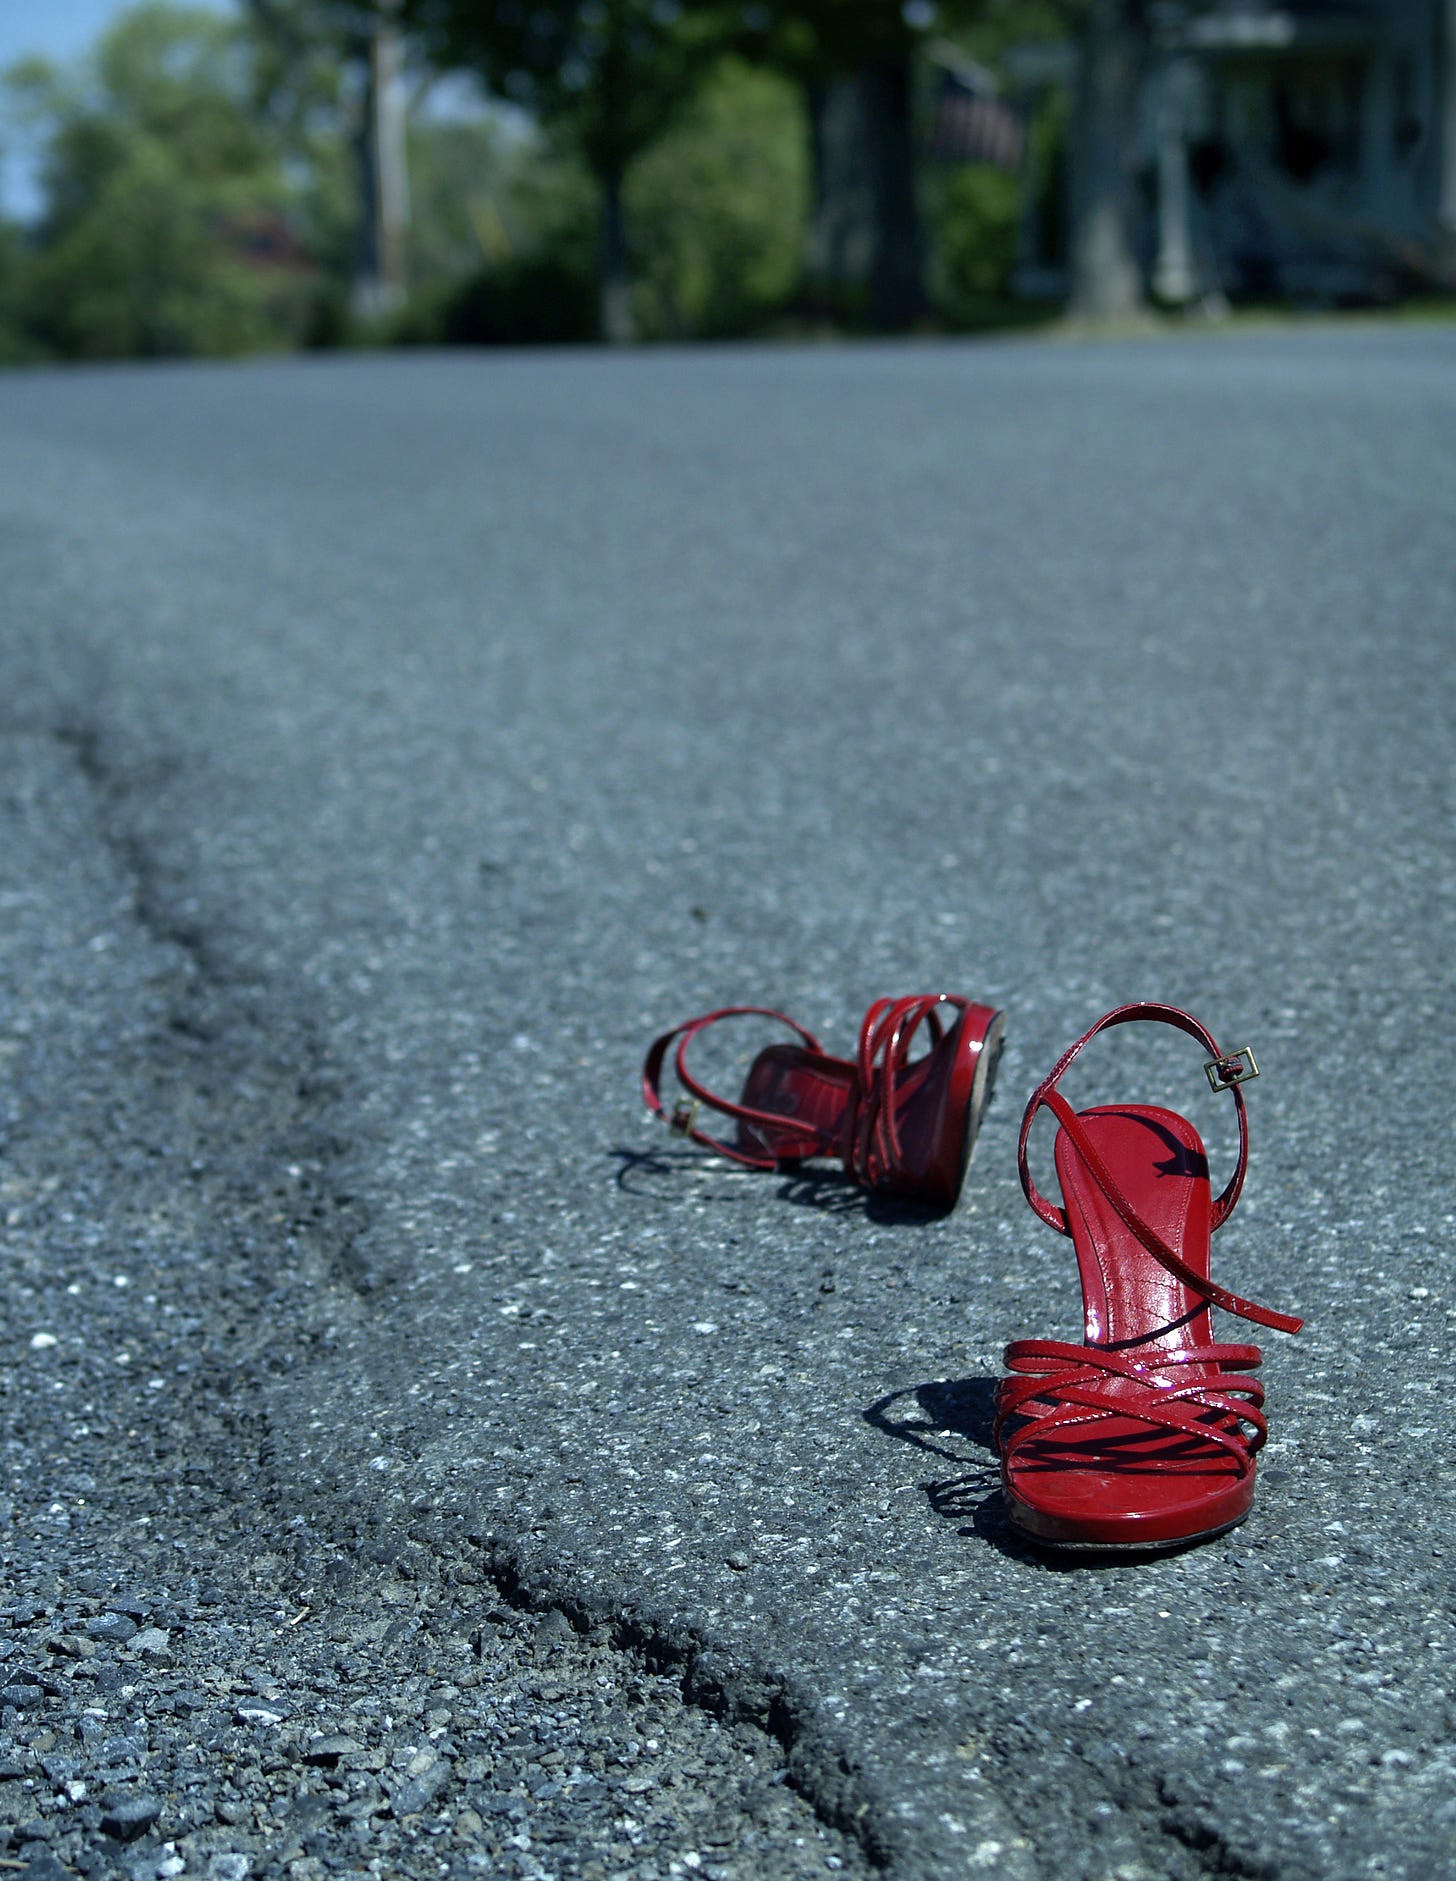 Red high heeled shoes with straps on the edge of an asphalt road. Very subtly in the background there is a small house flying an American flag